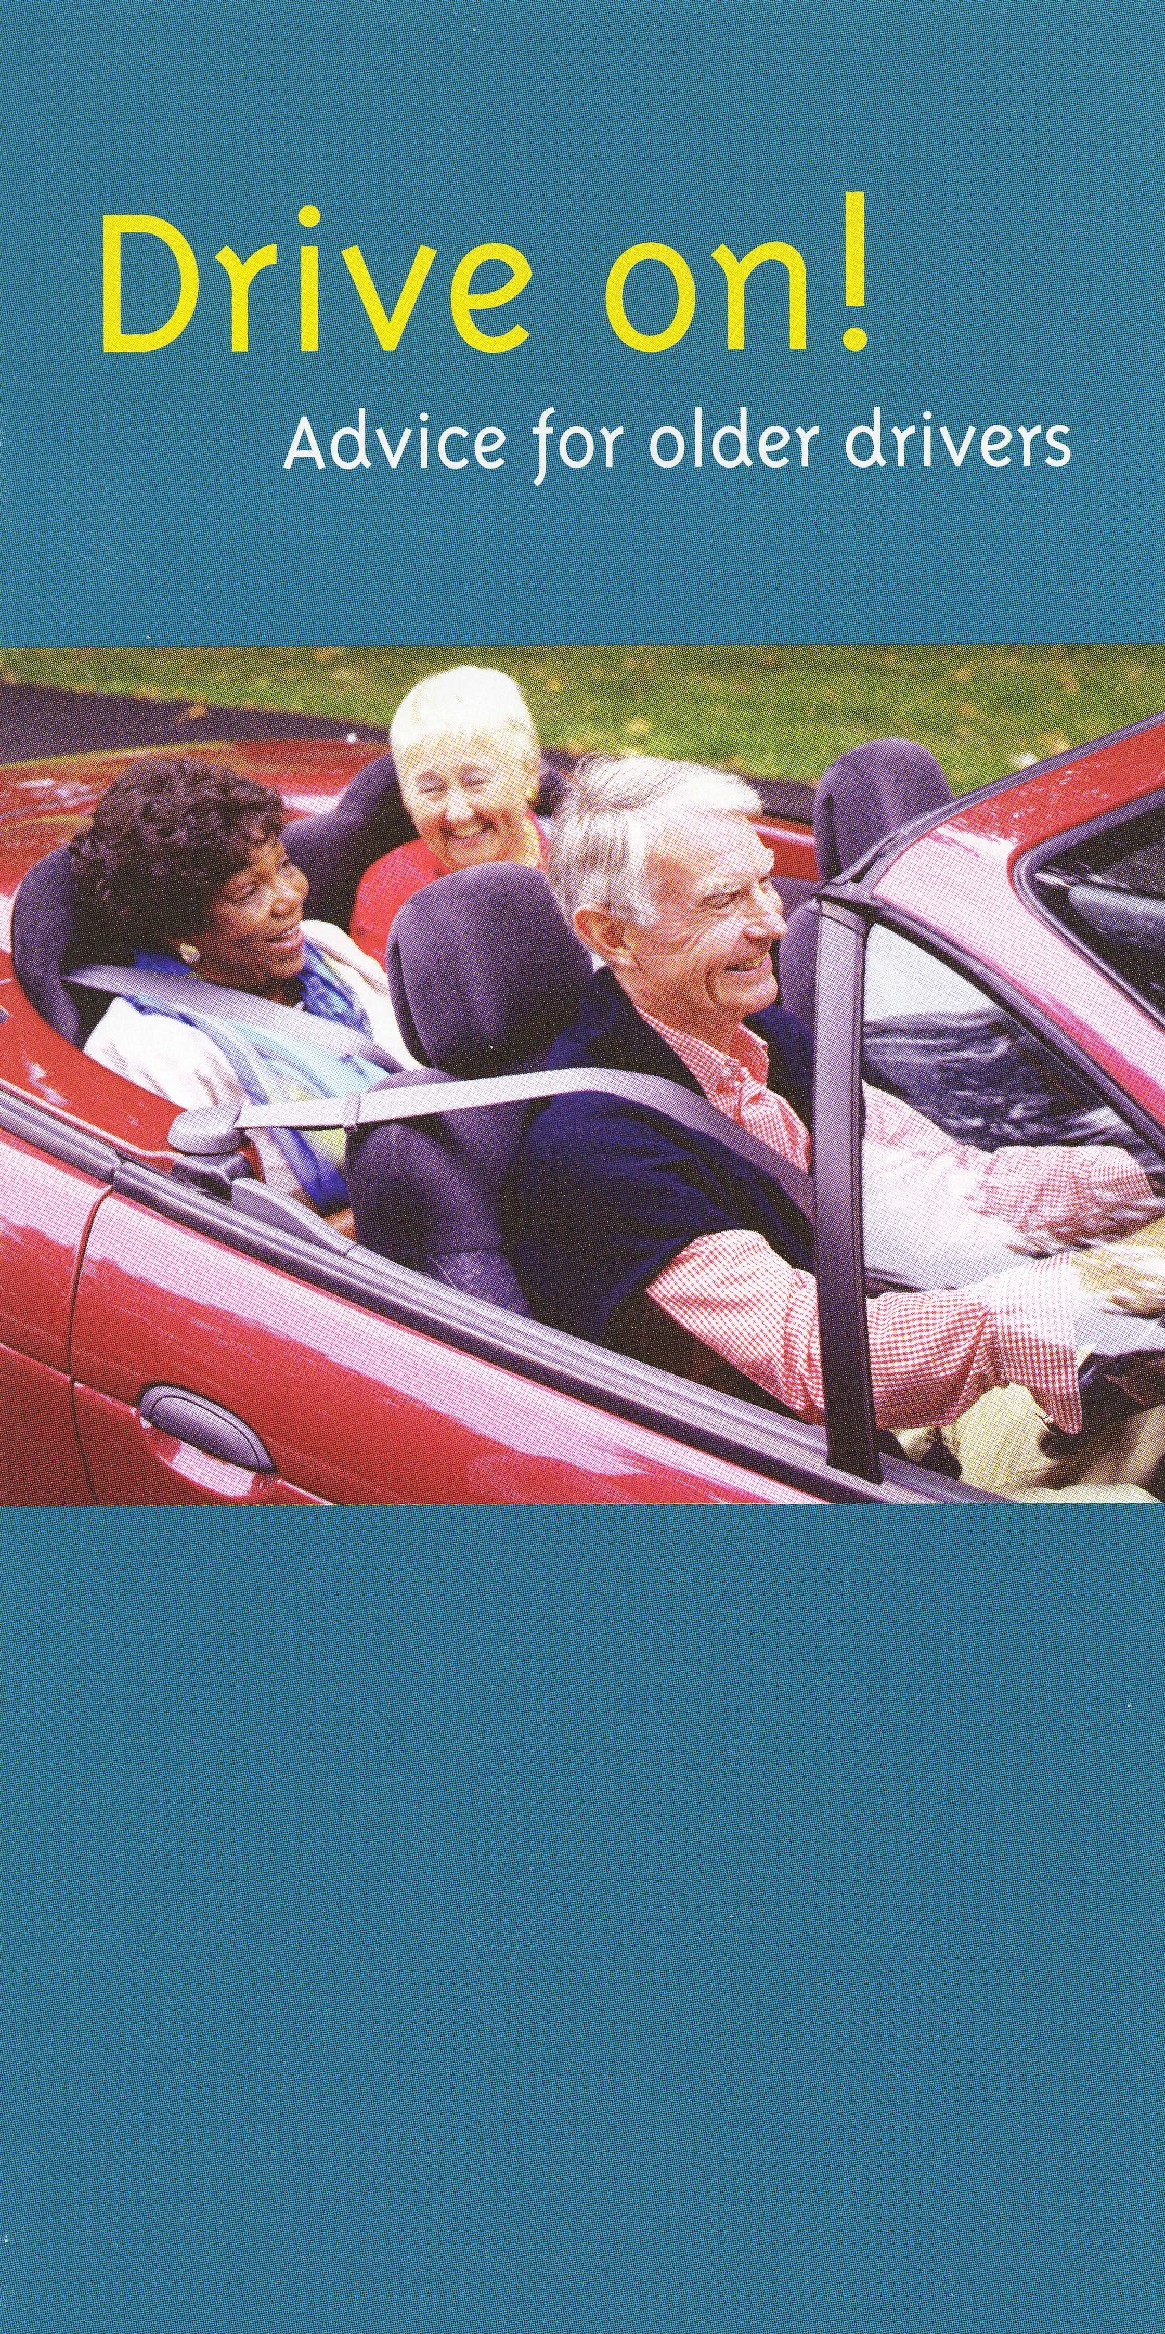 Drive On! Free advice for older drivers